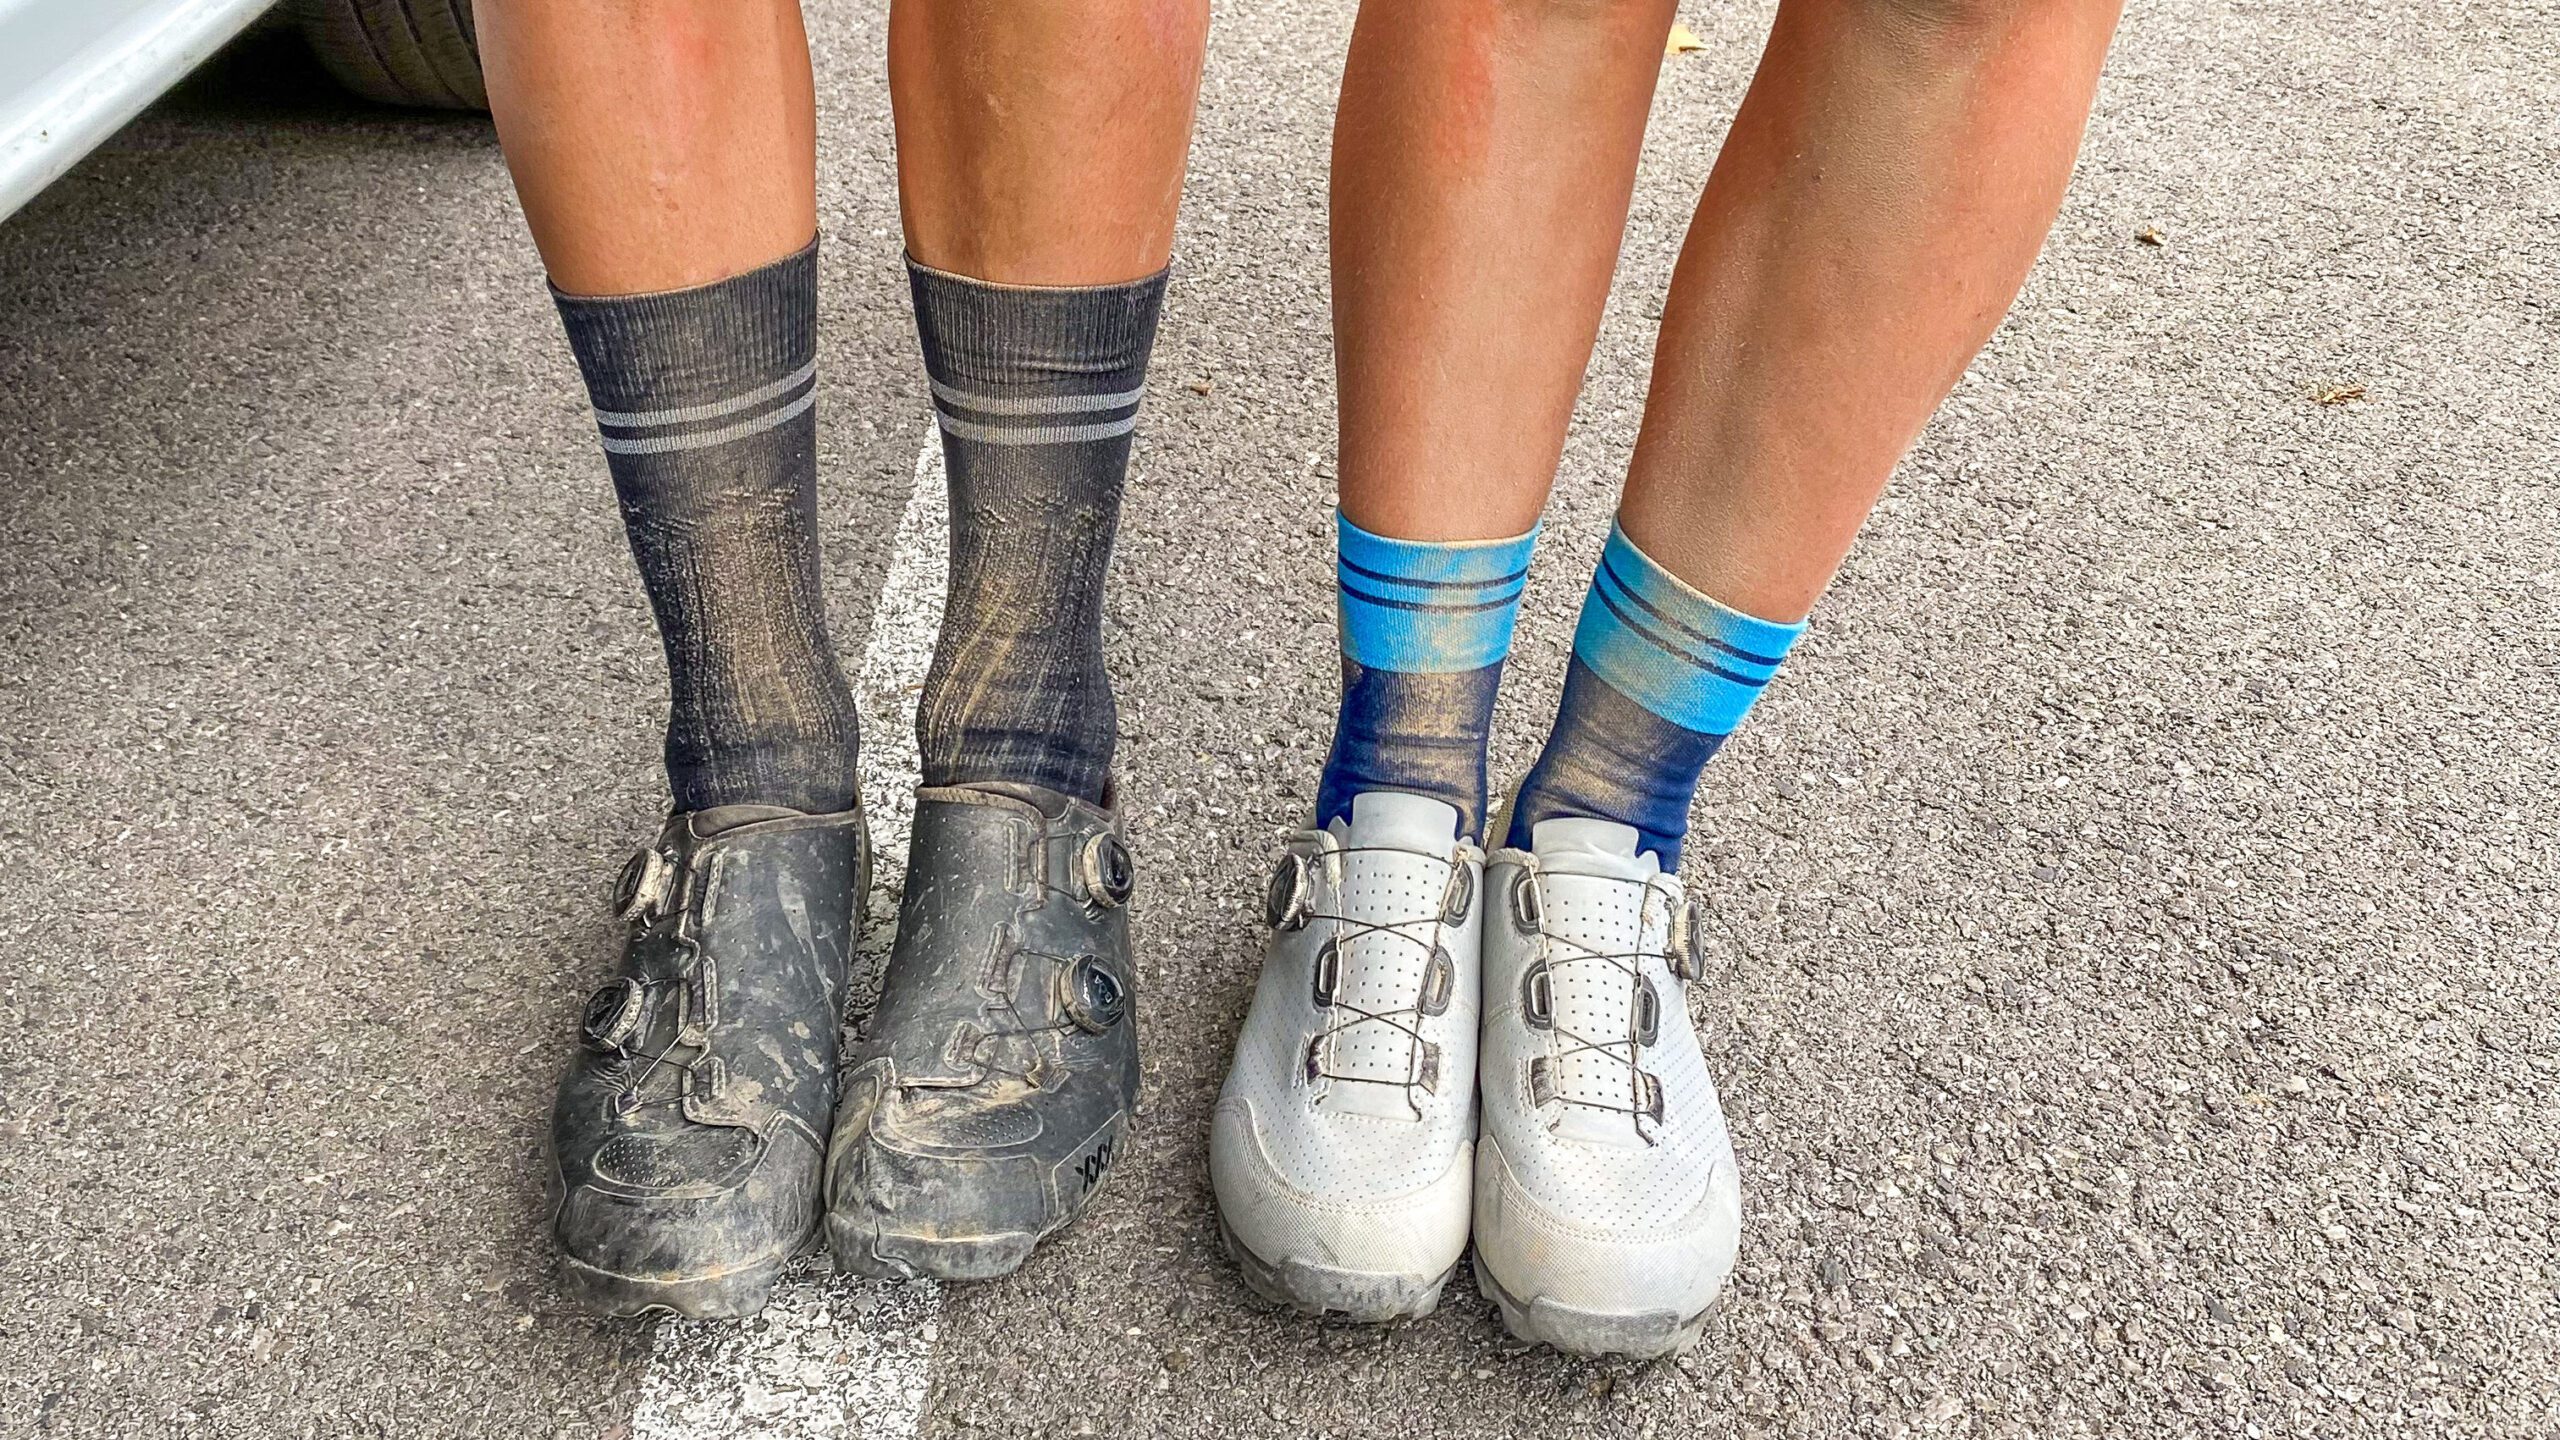 Two gravel cyclists and their dirty socks.